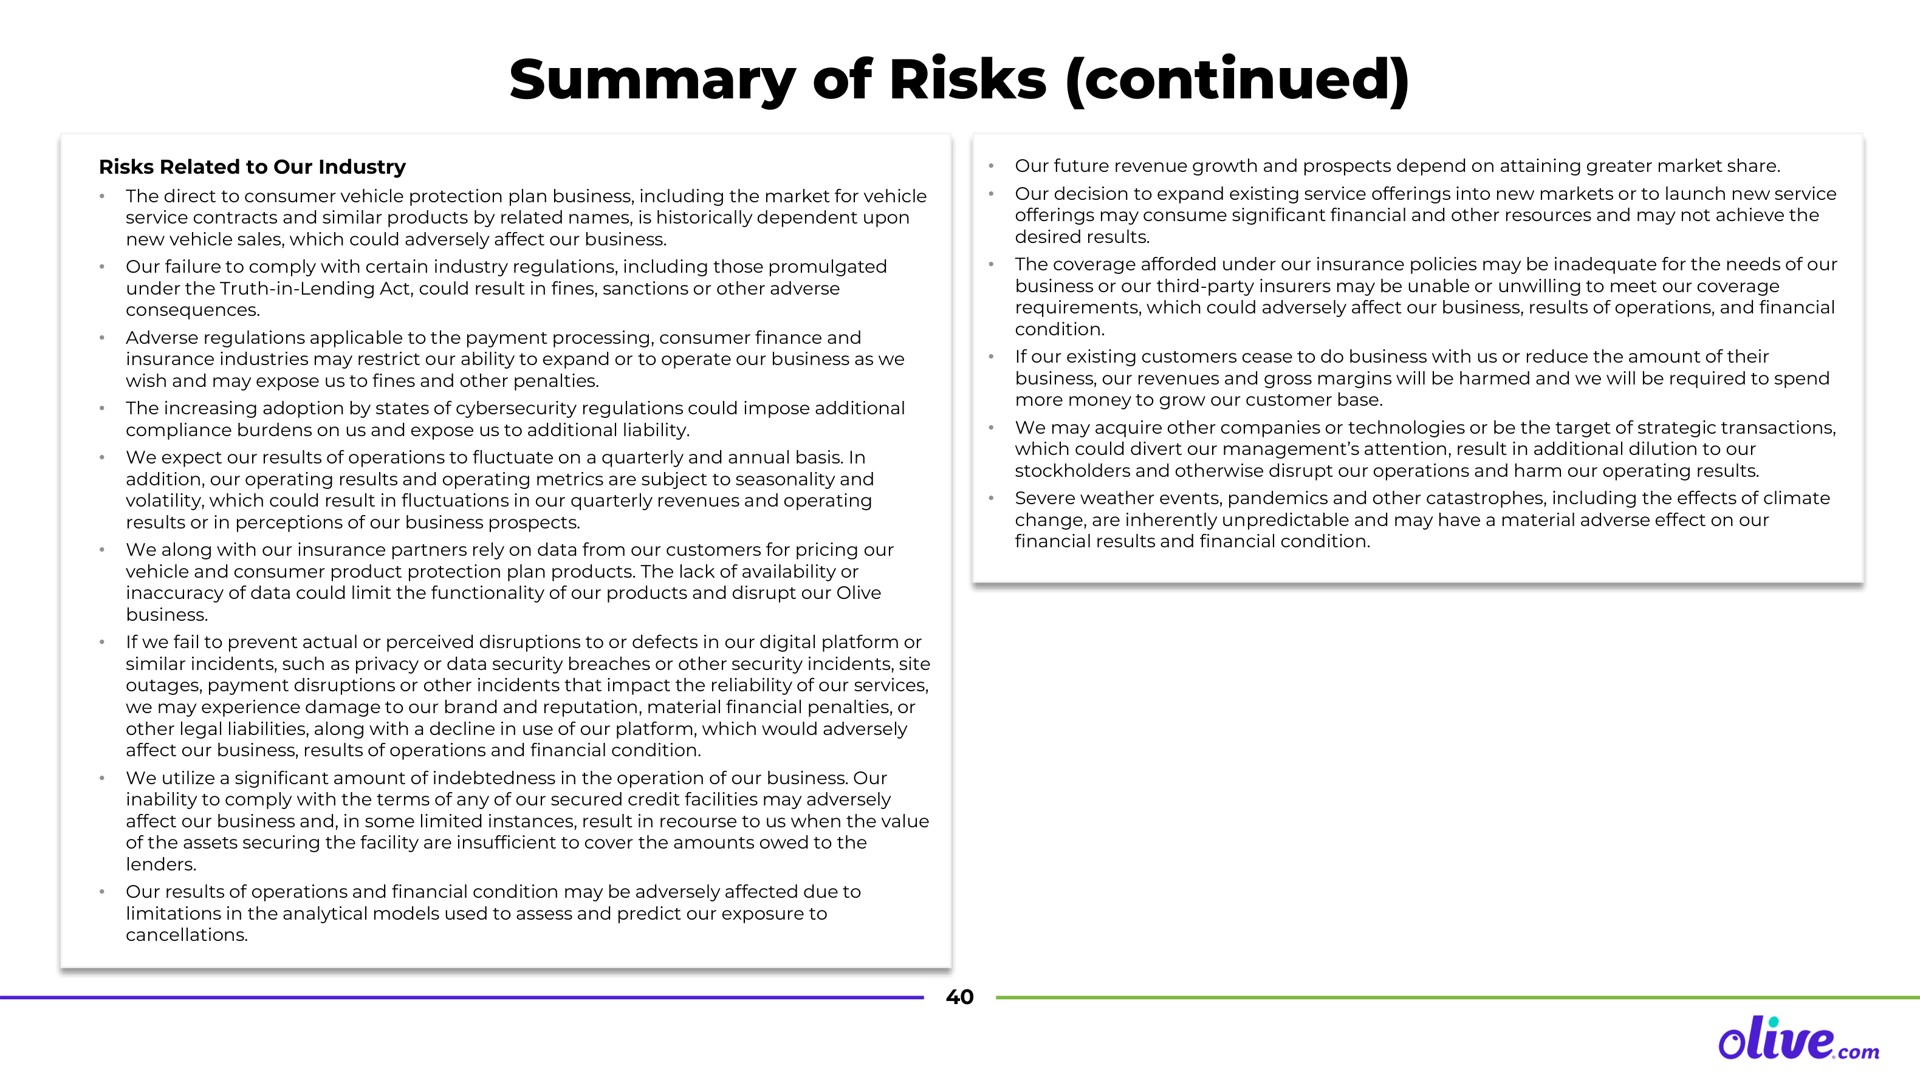 summary of risks continued | Olive.com